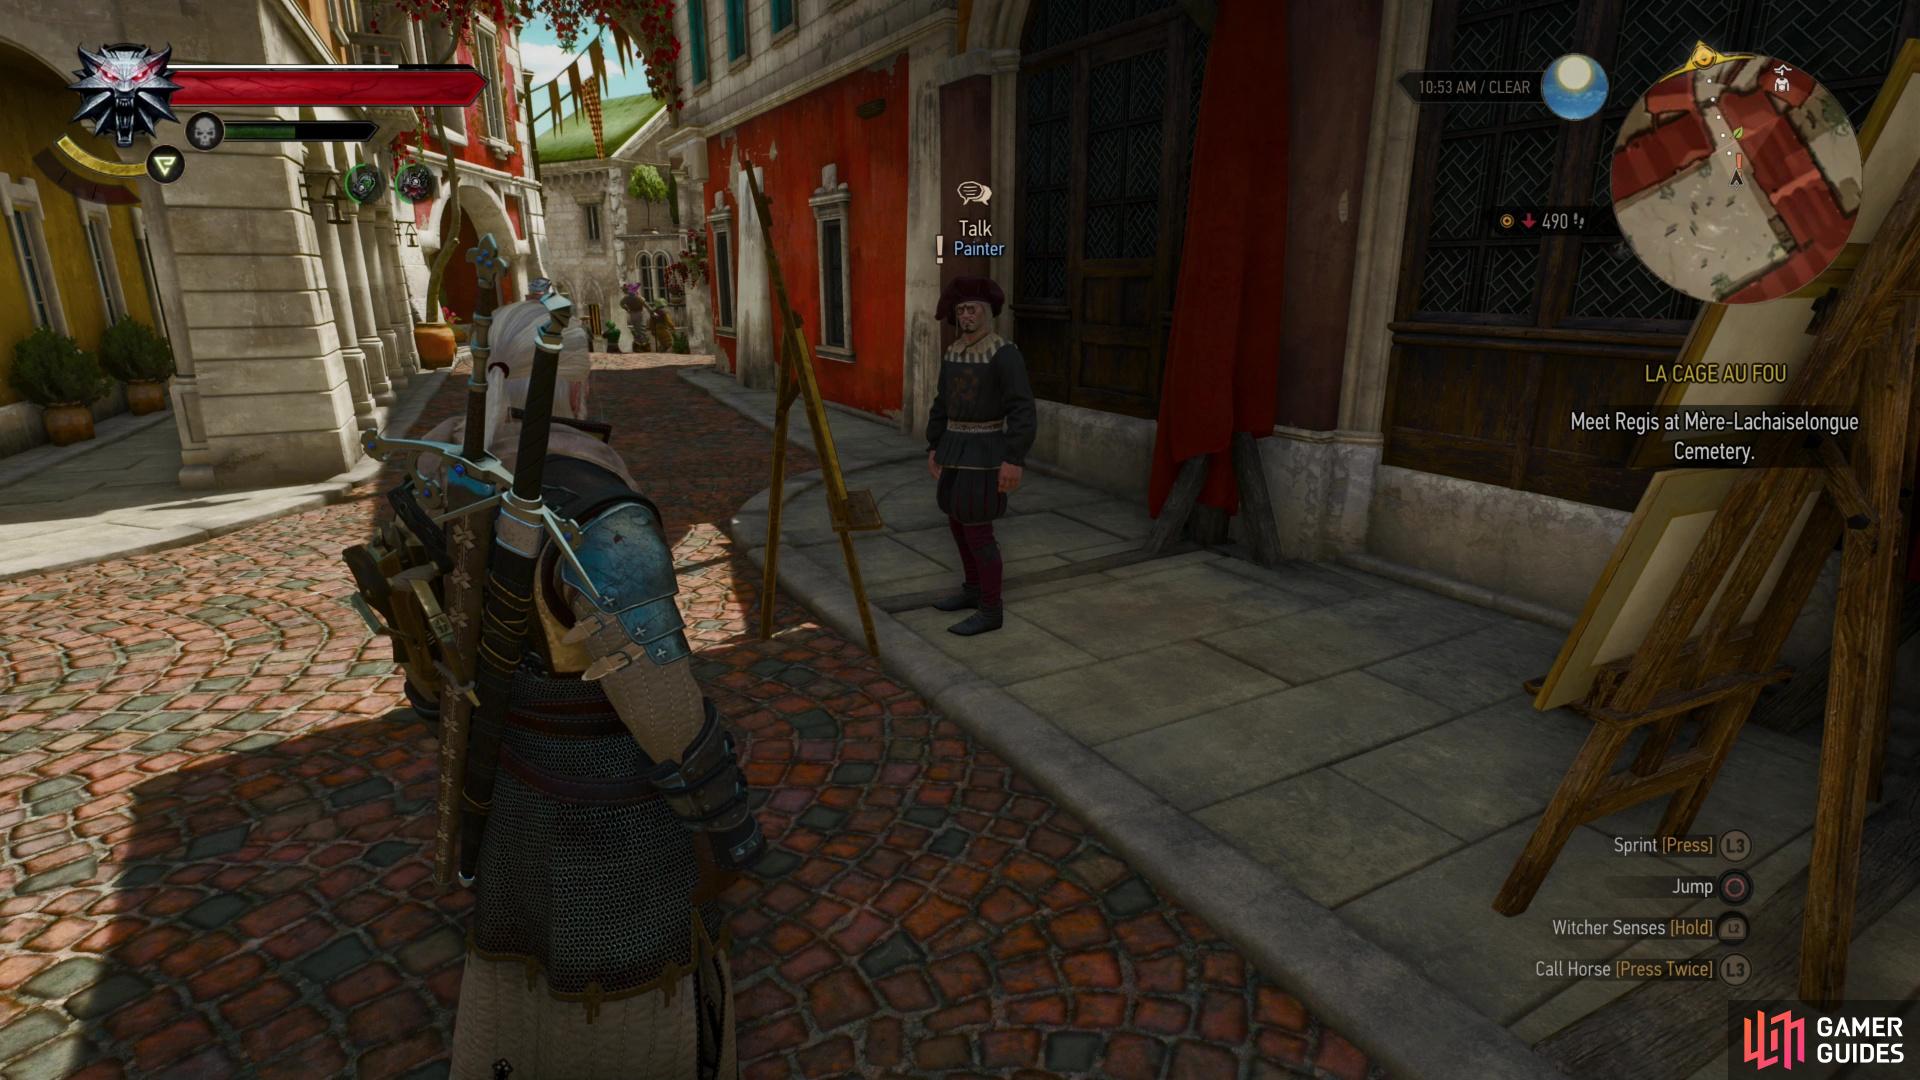 You can find a painter in a square south of The Gran’Place signpost. Talk to him to start this quest.